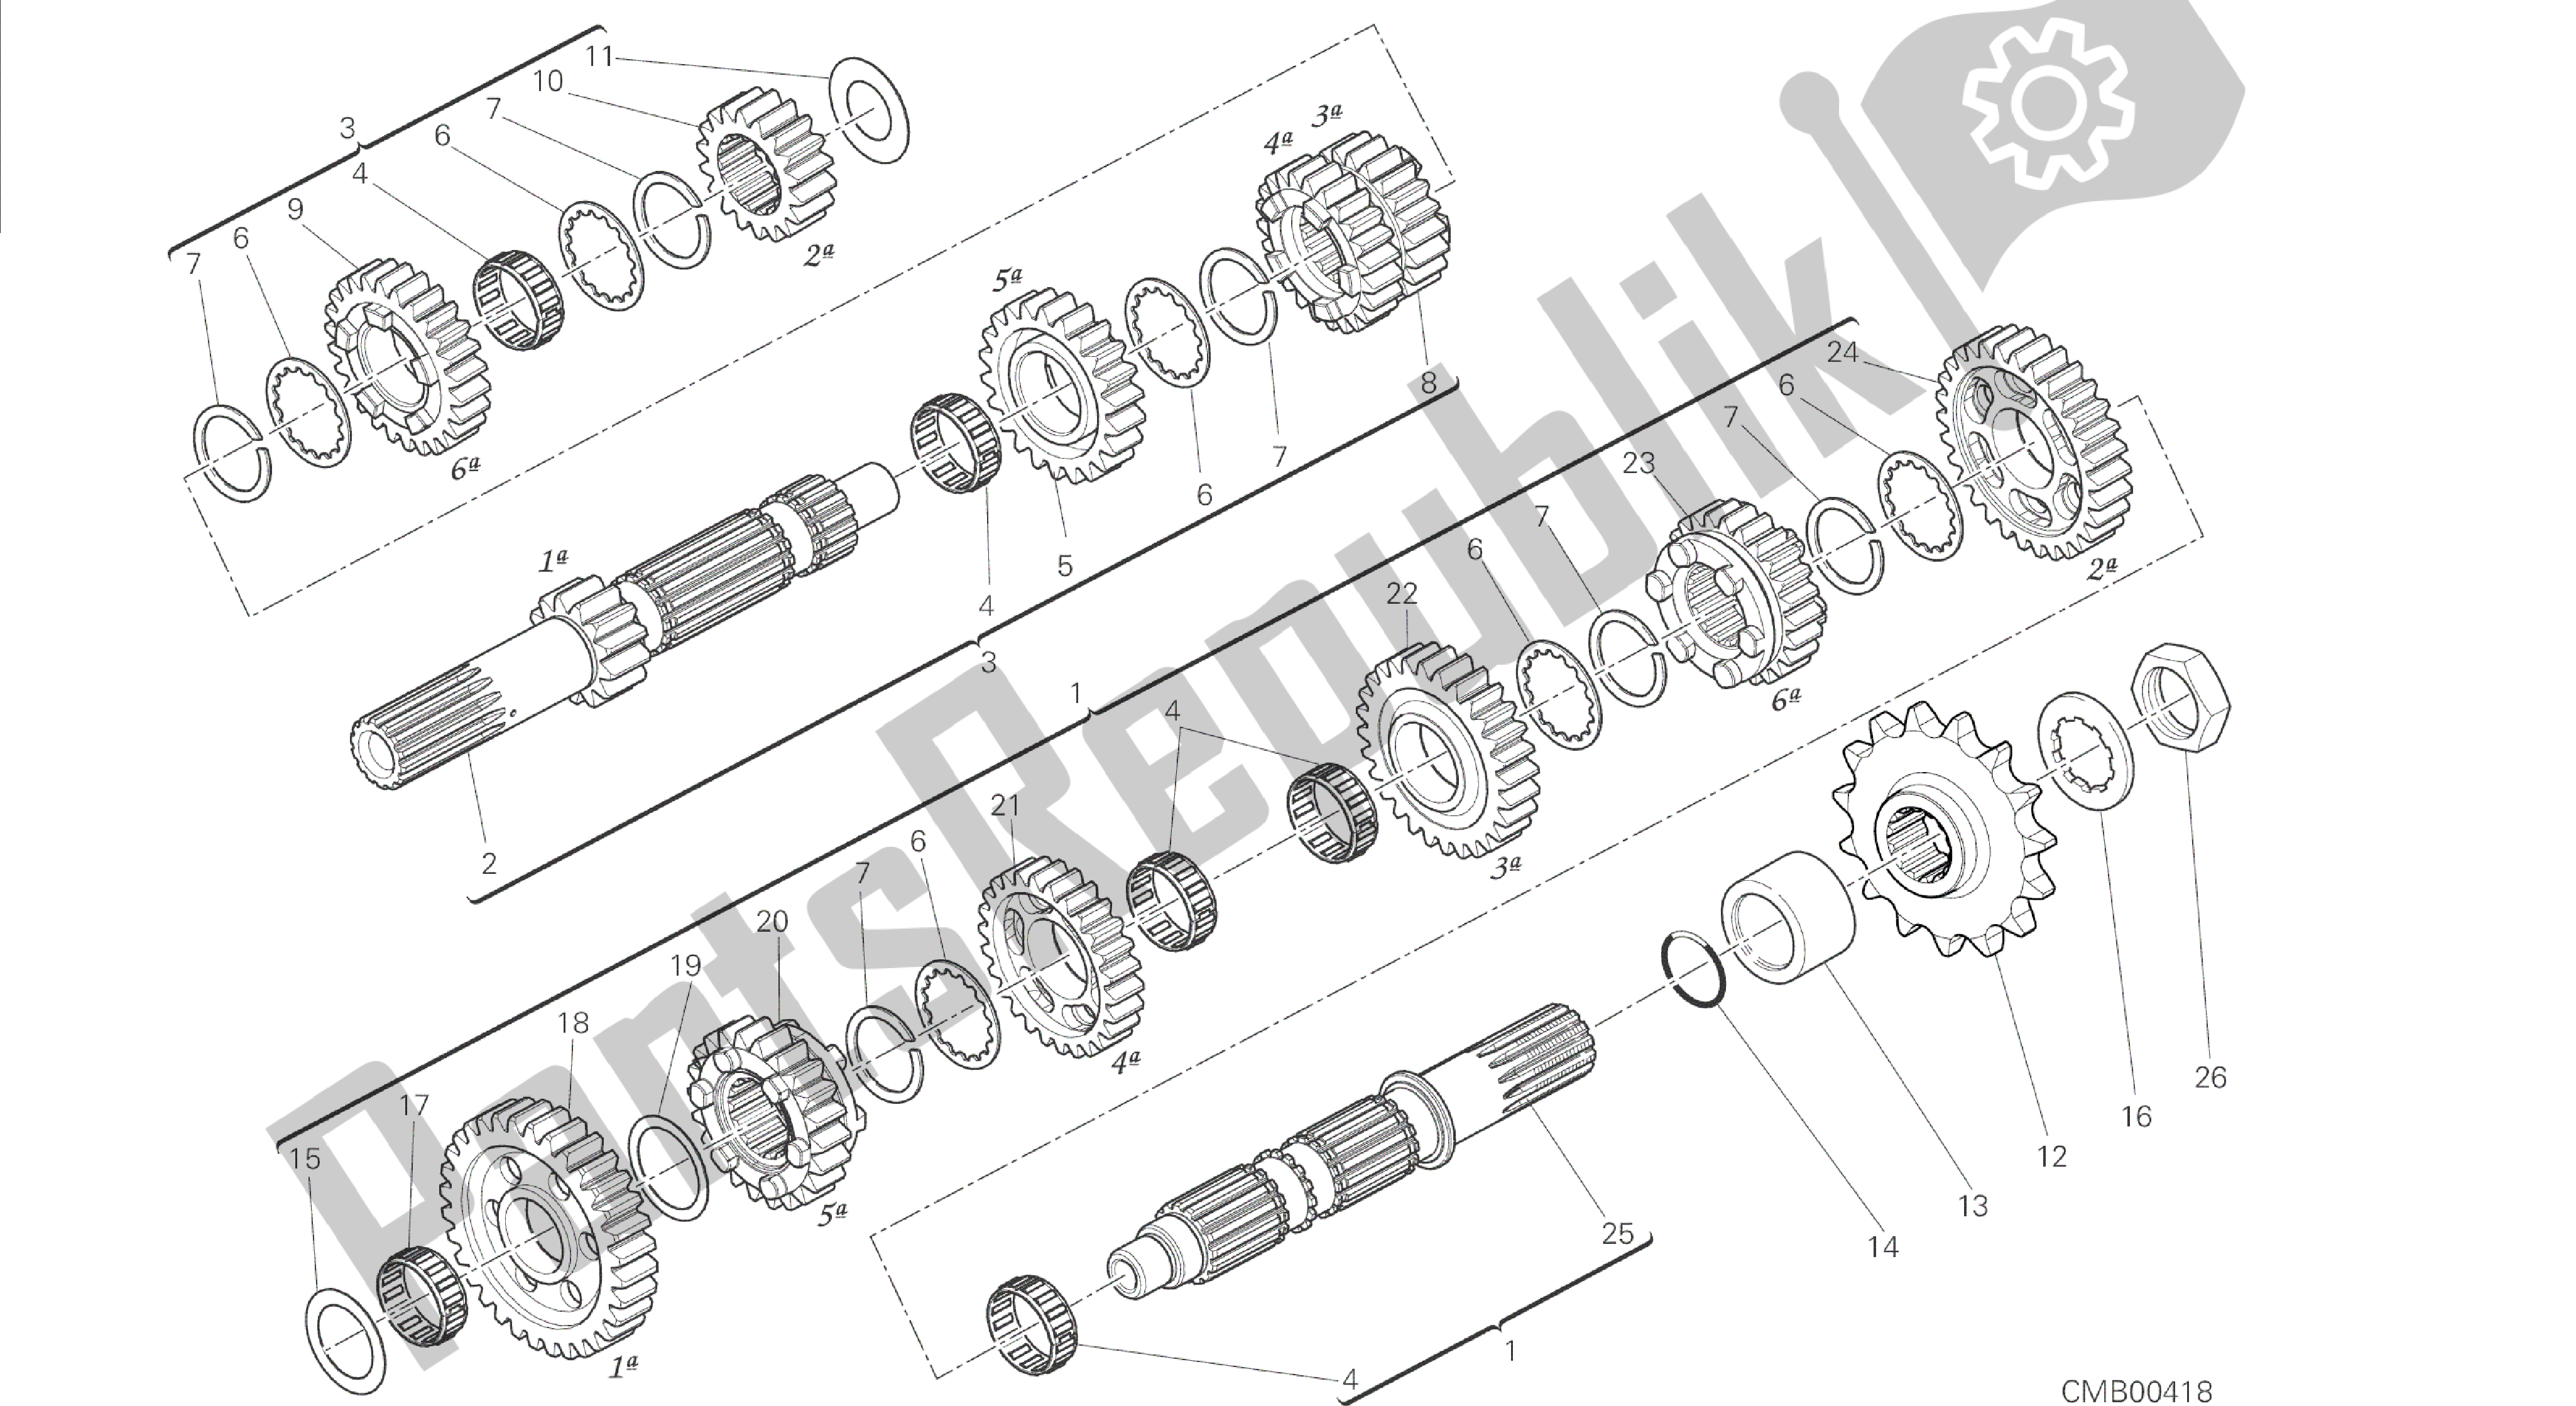 All parts for the Drawing 003 - Gear Box [mod:dvl]group Engine of the Ducati Diavel 1200 2014